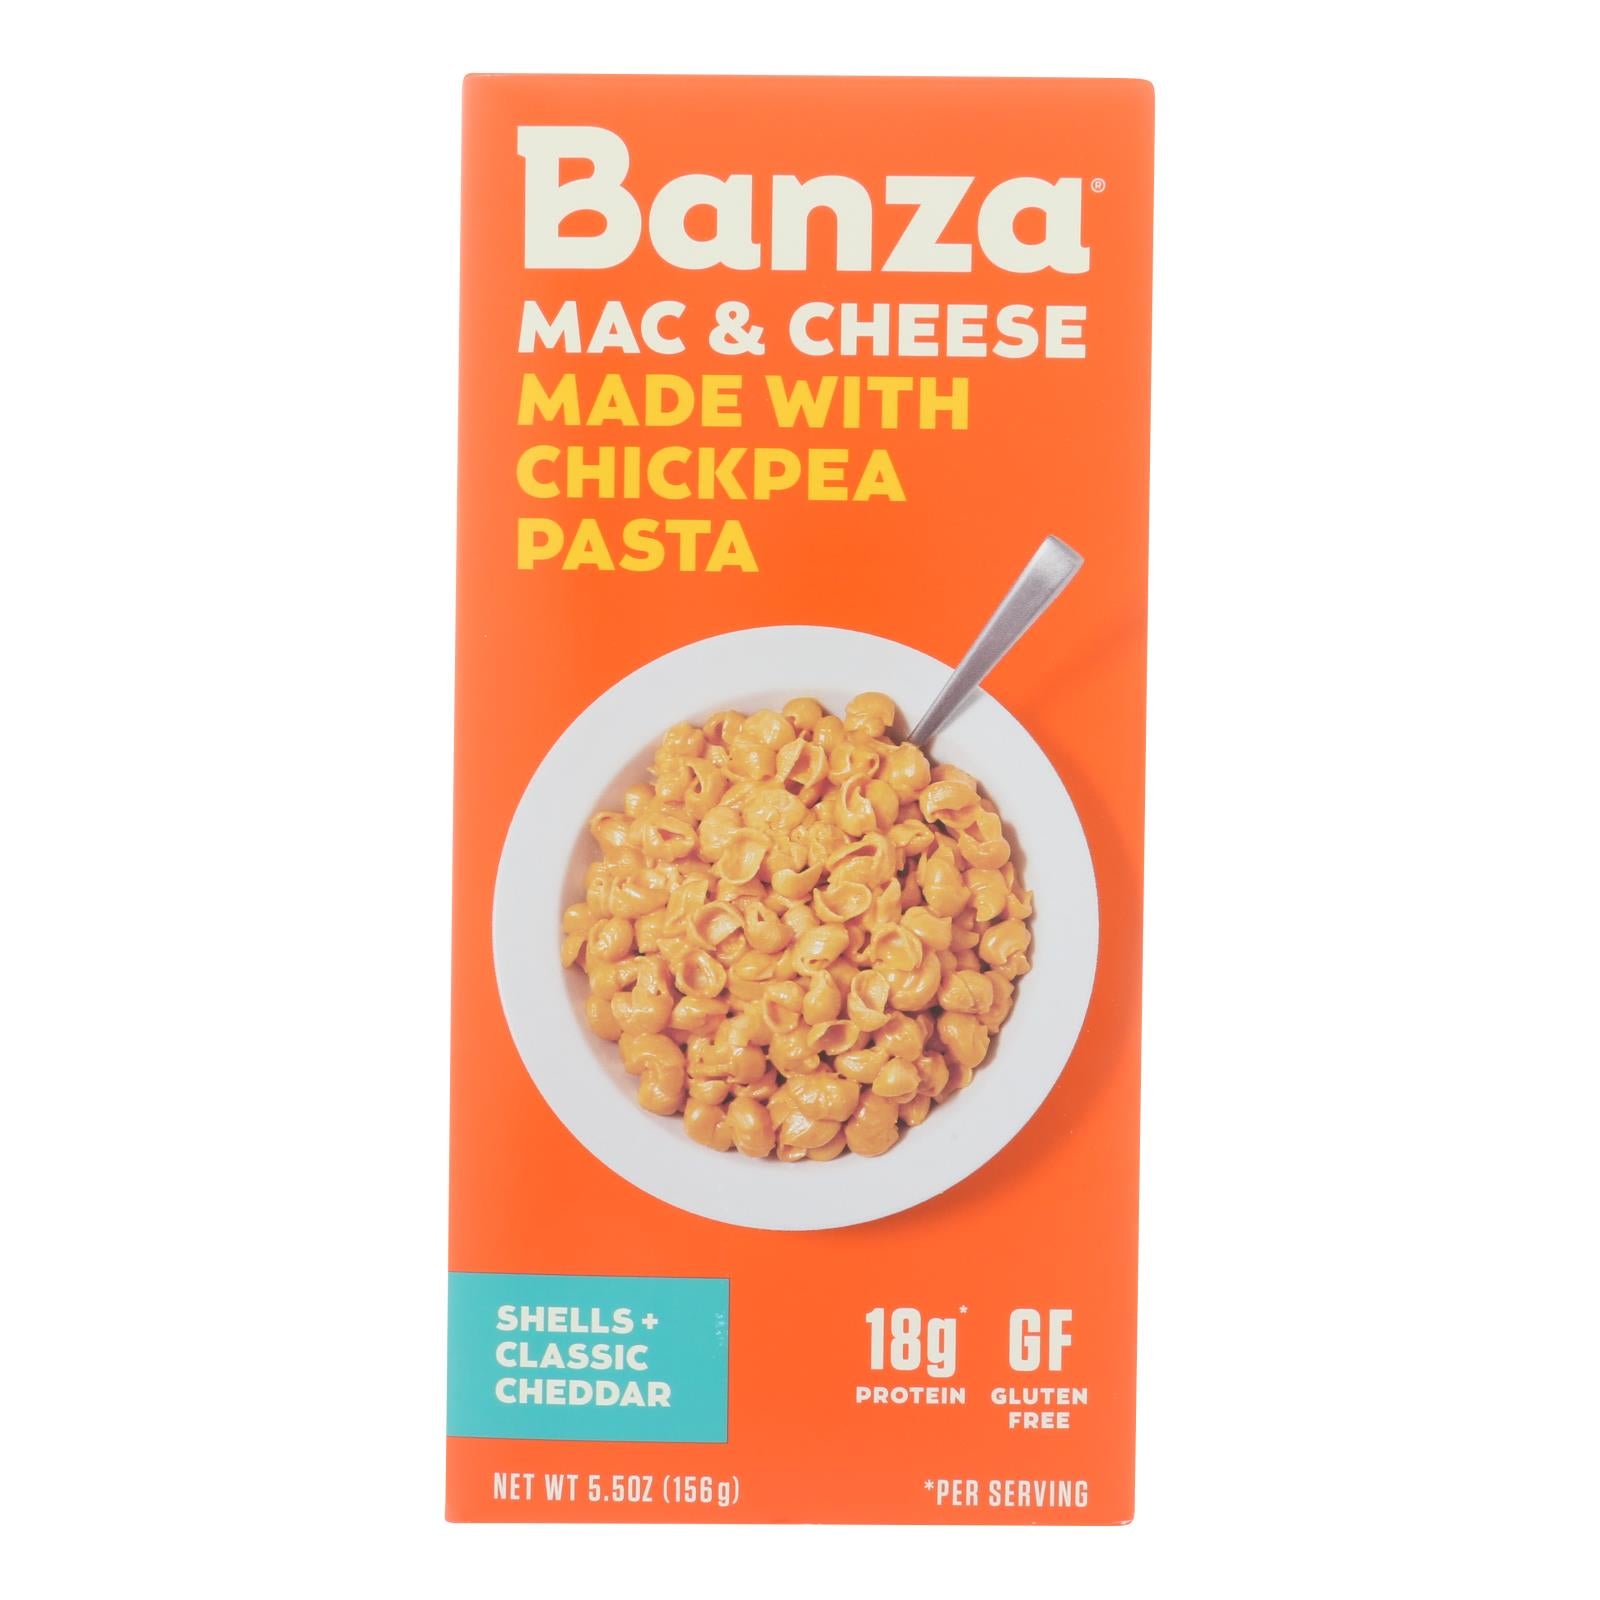 Banza, Banza - Chickpea Pasta Mac and Cheese - Shells and Classic Cheddar - Case of 6 - 5.5 oz. (Pack of 6)